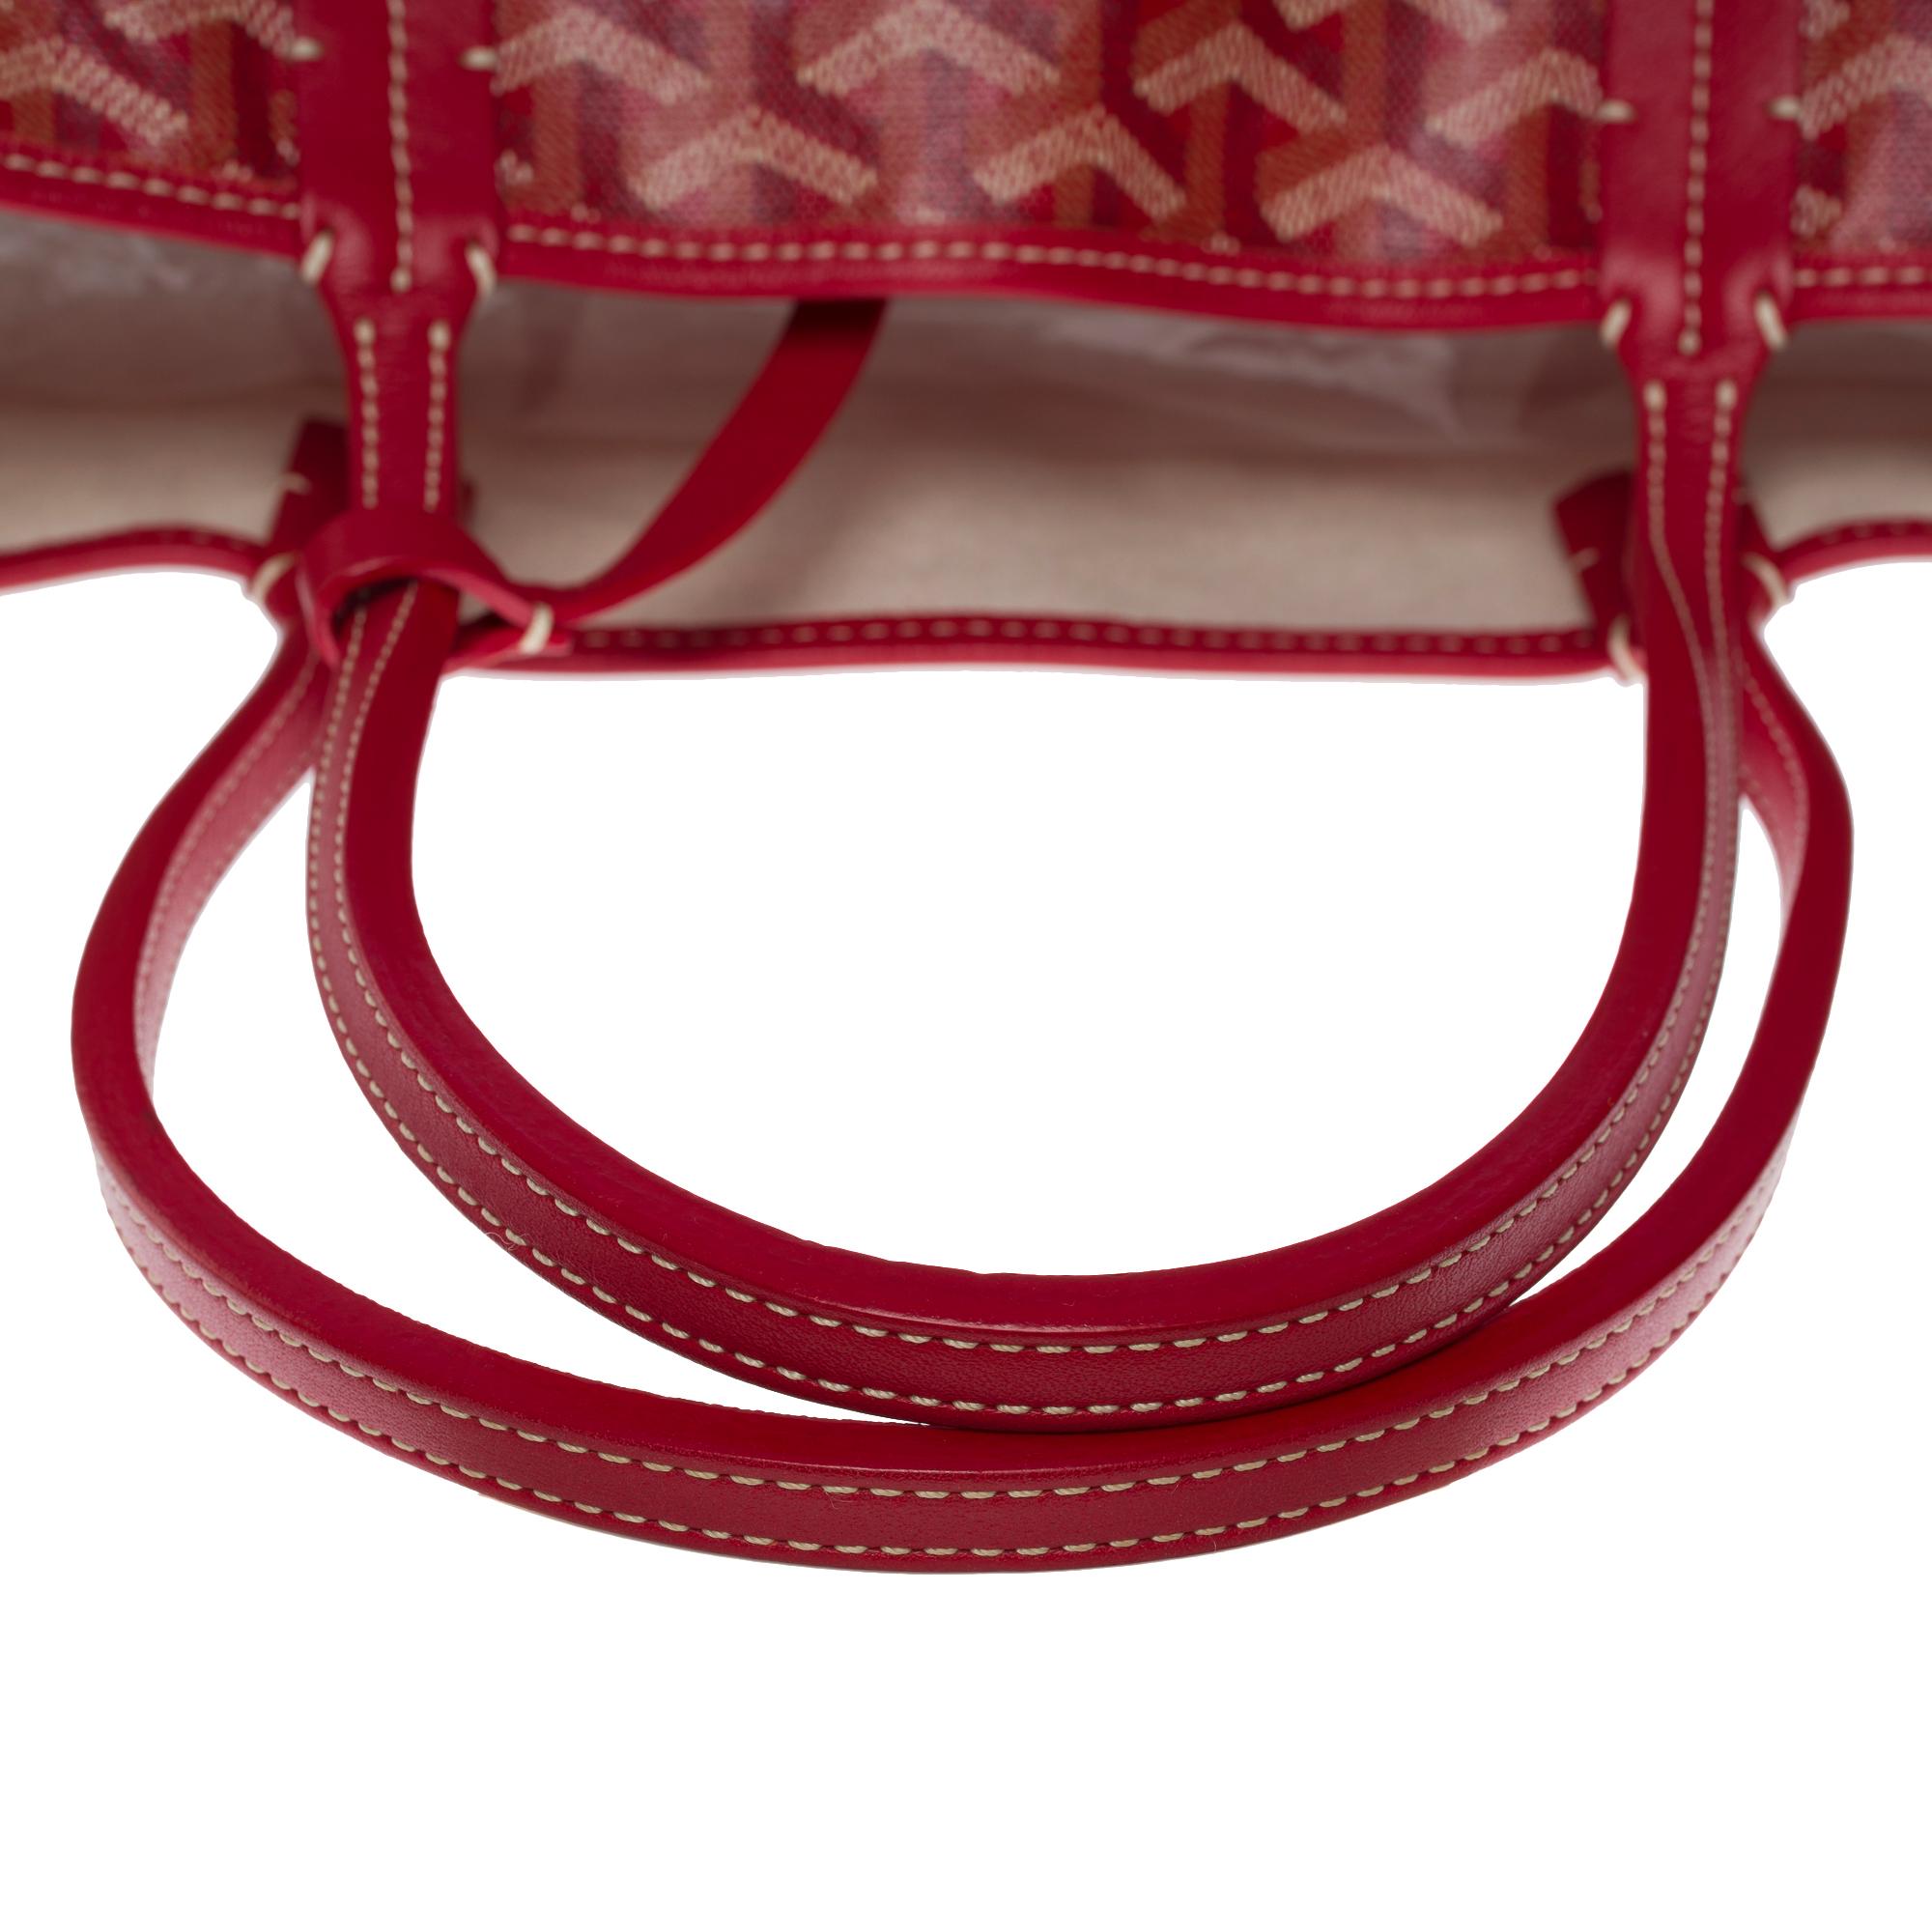 The Coveted Goyard Saint-Louis PM Tote bag in Red canvas and leather, SHW 4